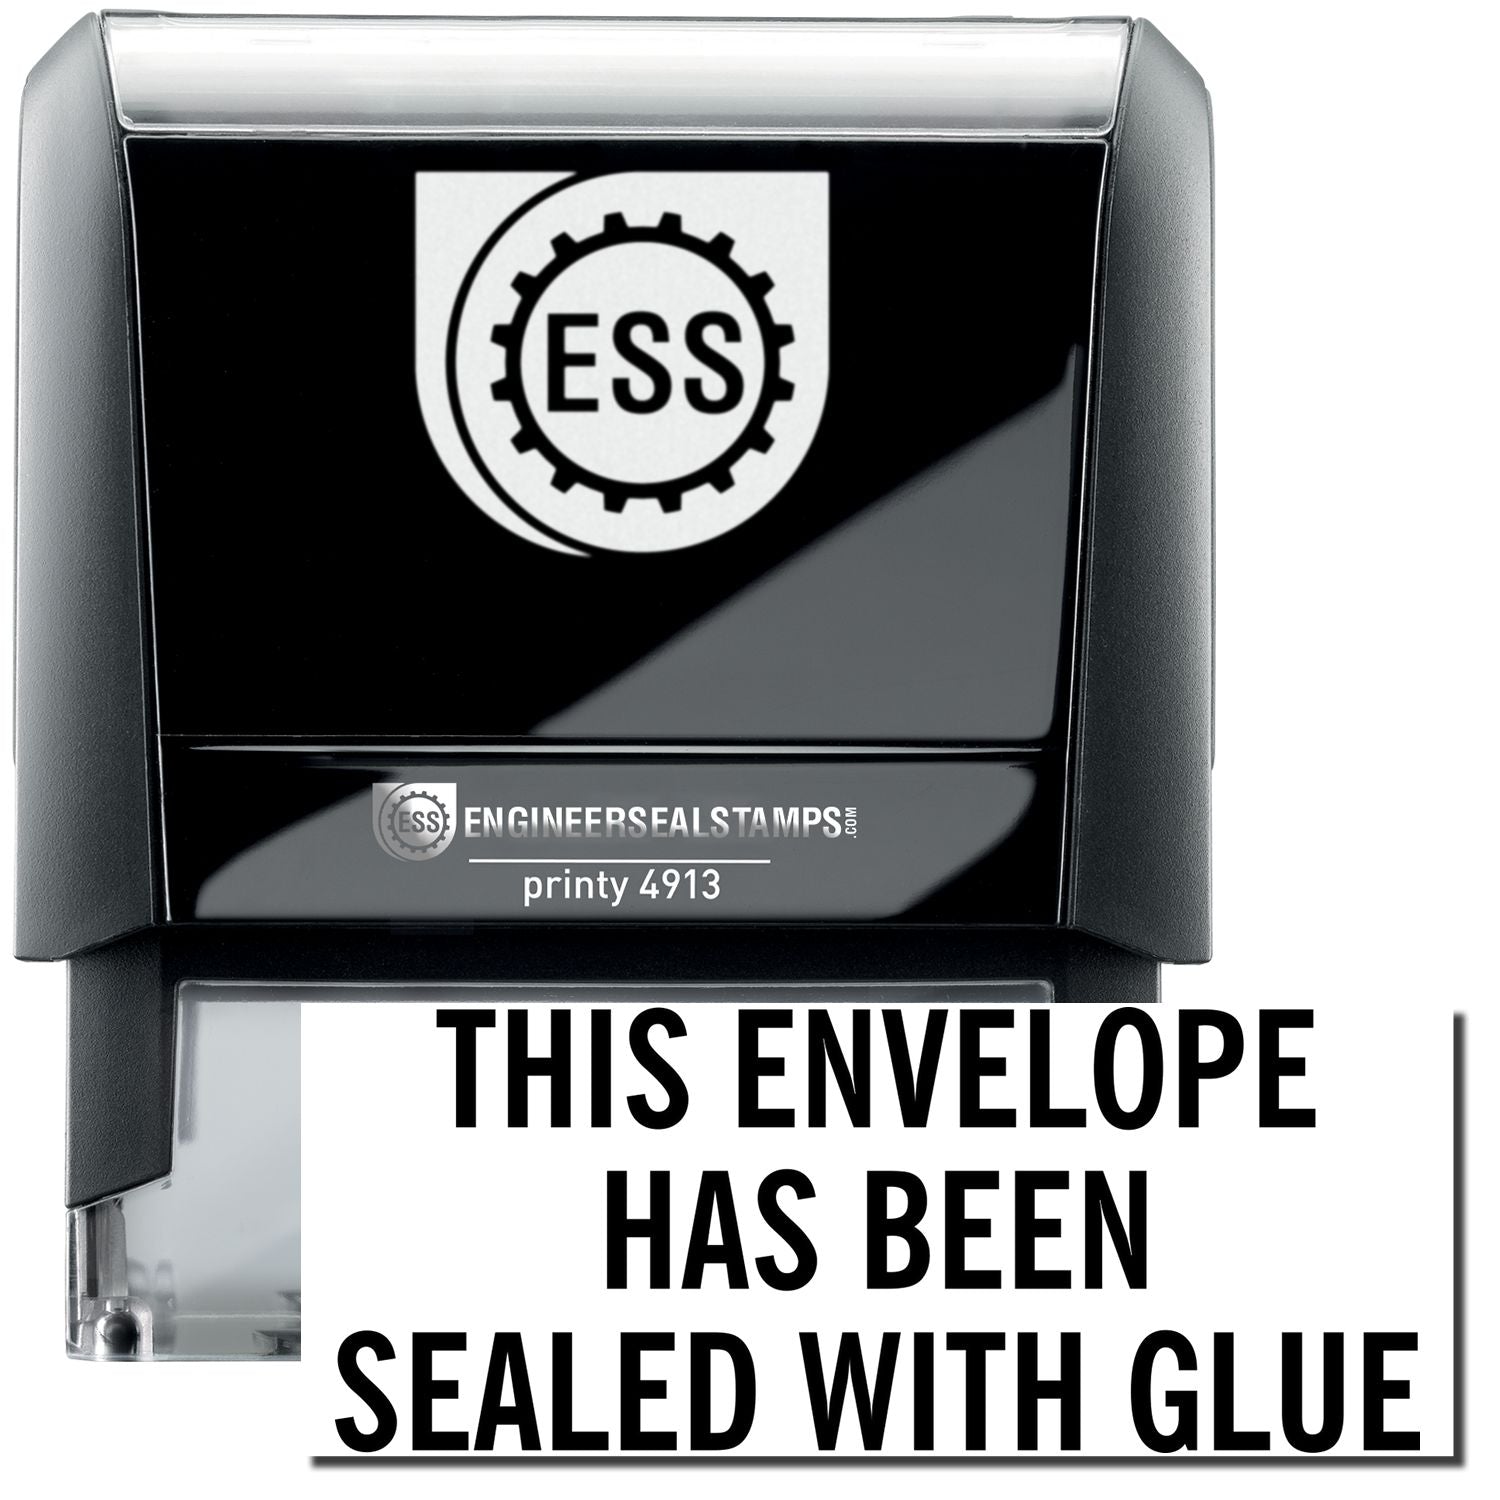 A self-inking stamp with a stamped image showing how the text "THIS ENVELOPE HAS BEEN SEALED WITH GLUE" in a large font is displayed by it after stamping.